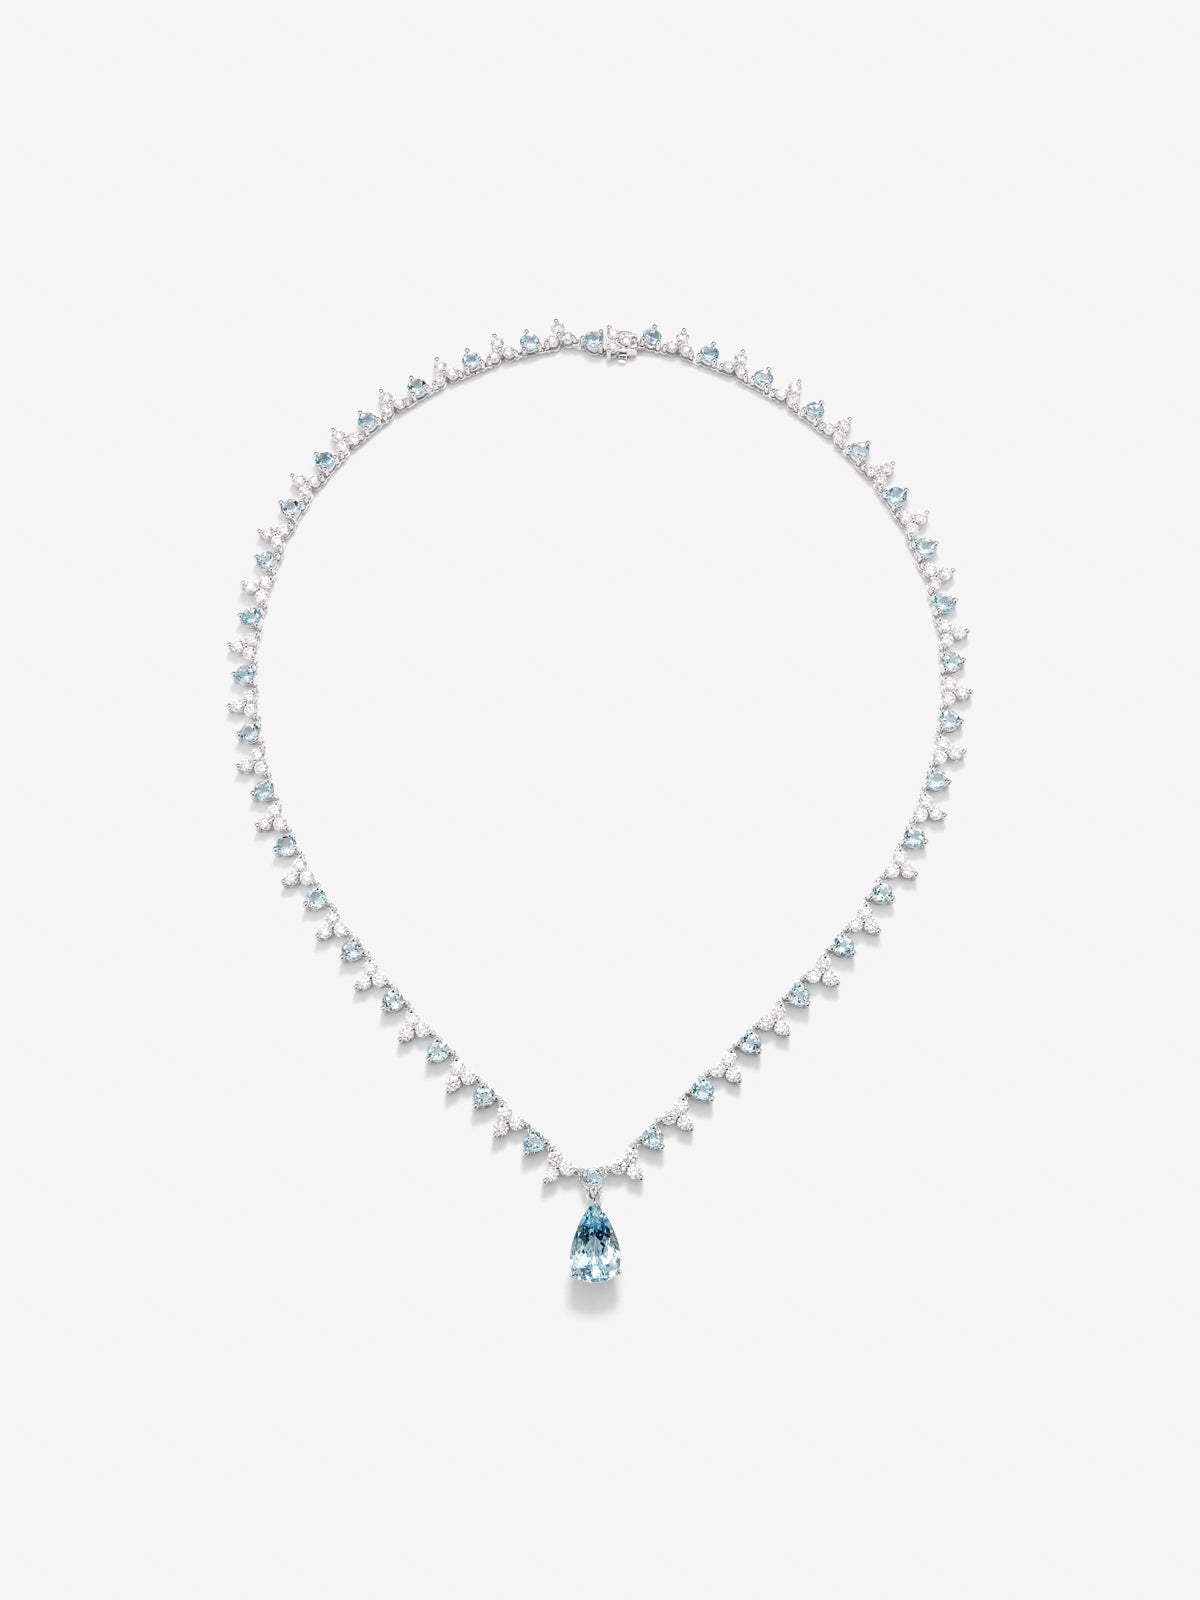 18K White Gold Rivière Collar with Aguamarina Azul in 3 cts pear size, blue aquamarines in bright size 5.7 cts and white diamonds in bright size 6.25 cts